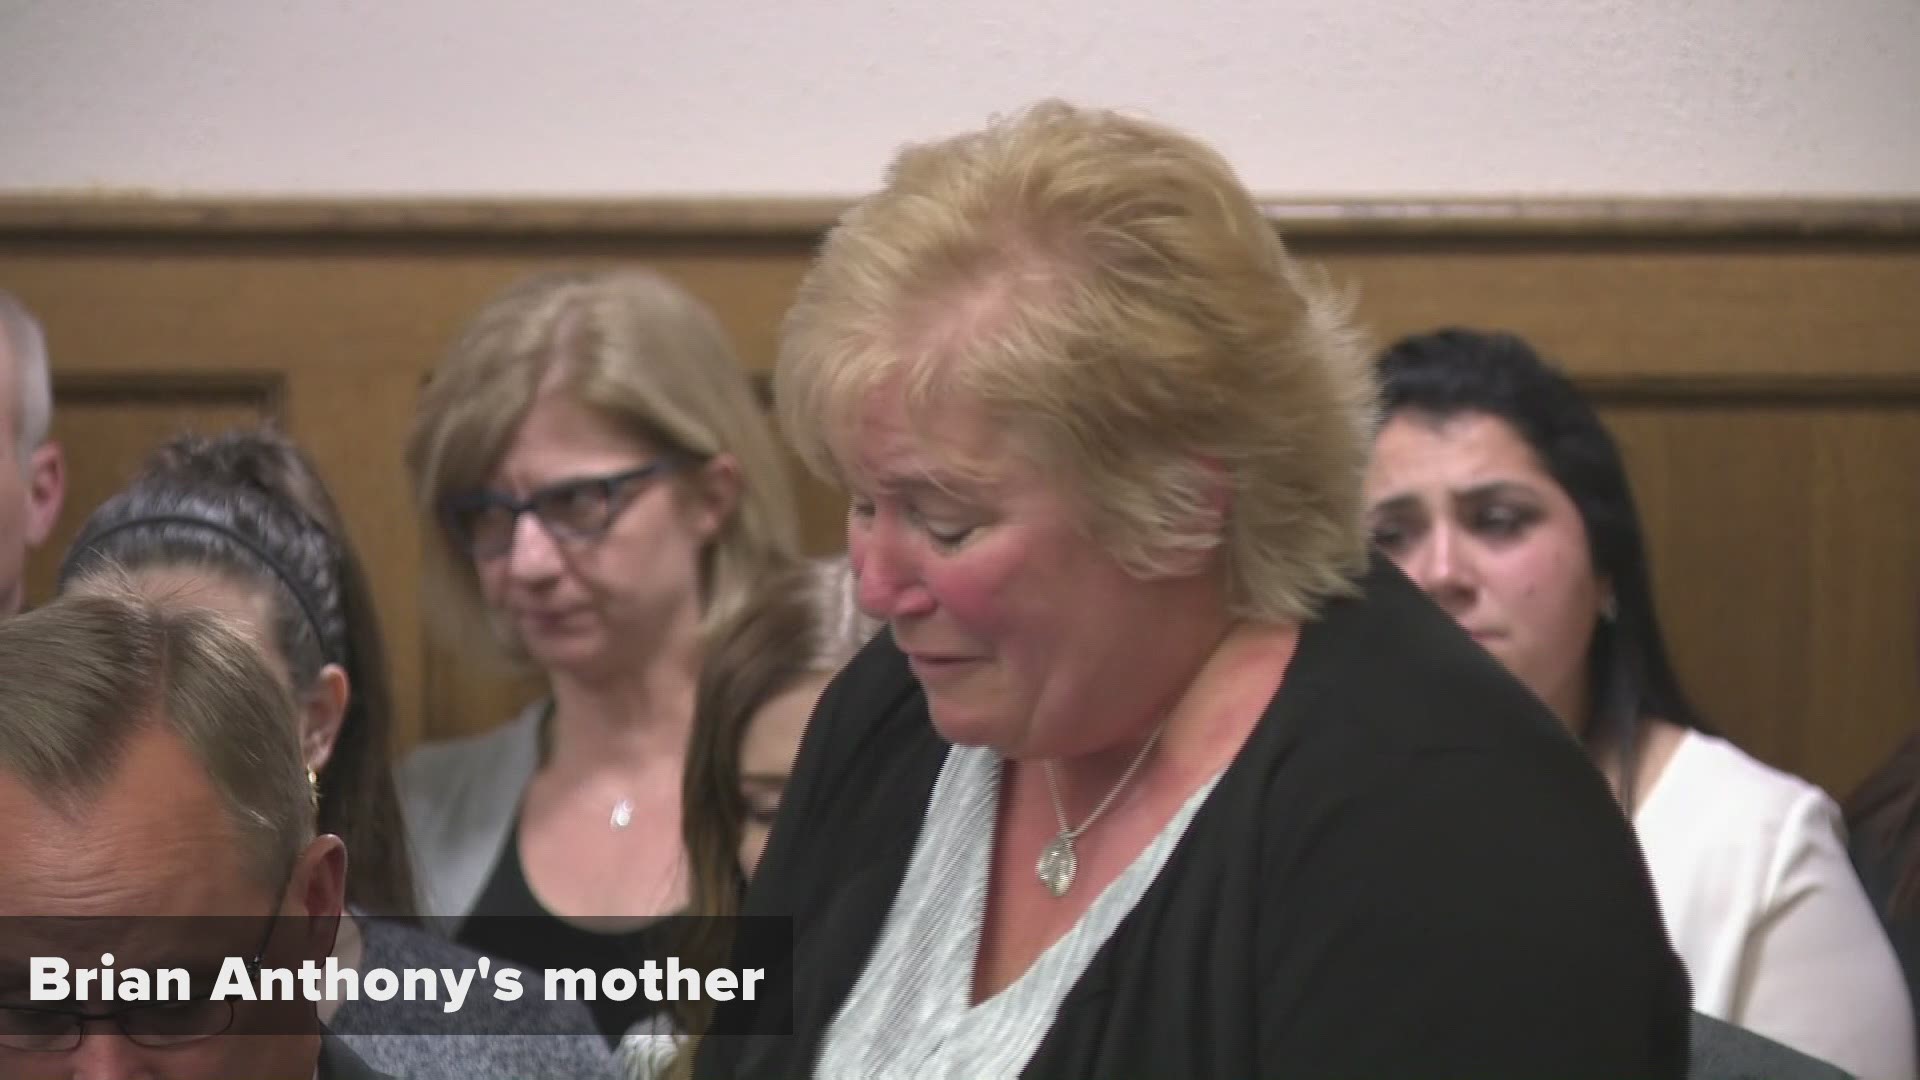 Emotional moments from relatives during the sentencing for Brian Anthony, who received 11 1/2 years for the death of Mentor Officer Mathew Mazany.